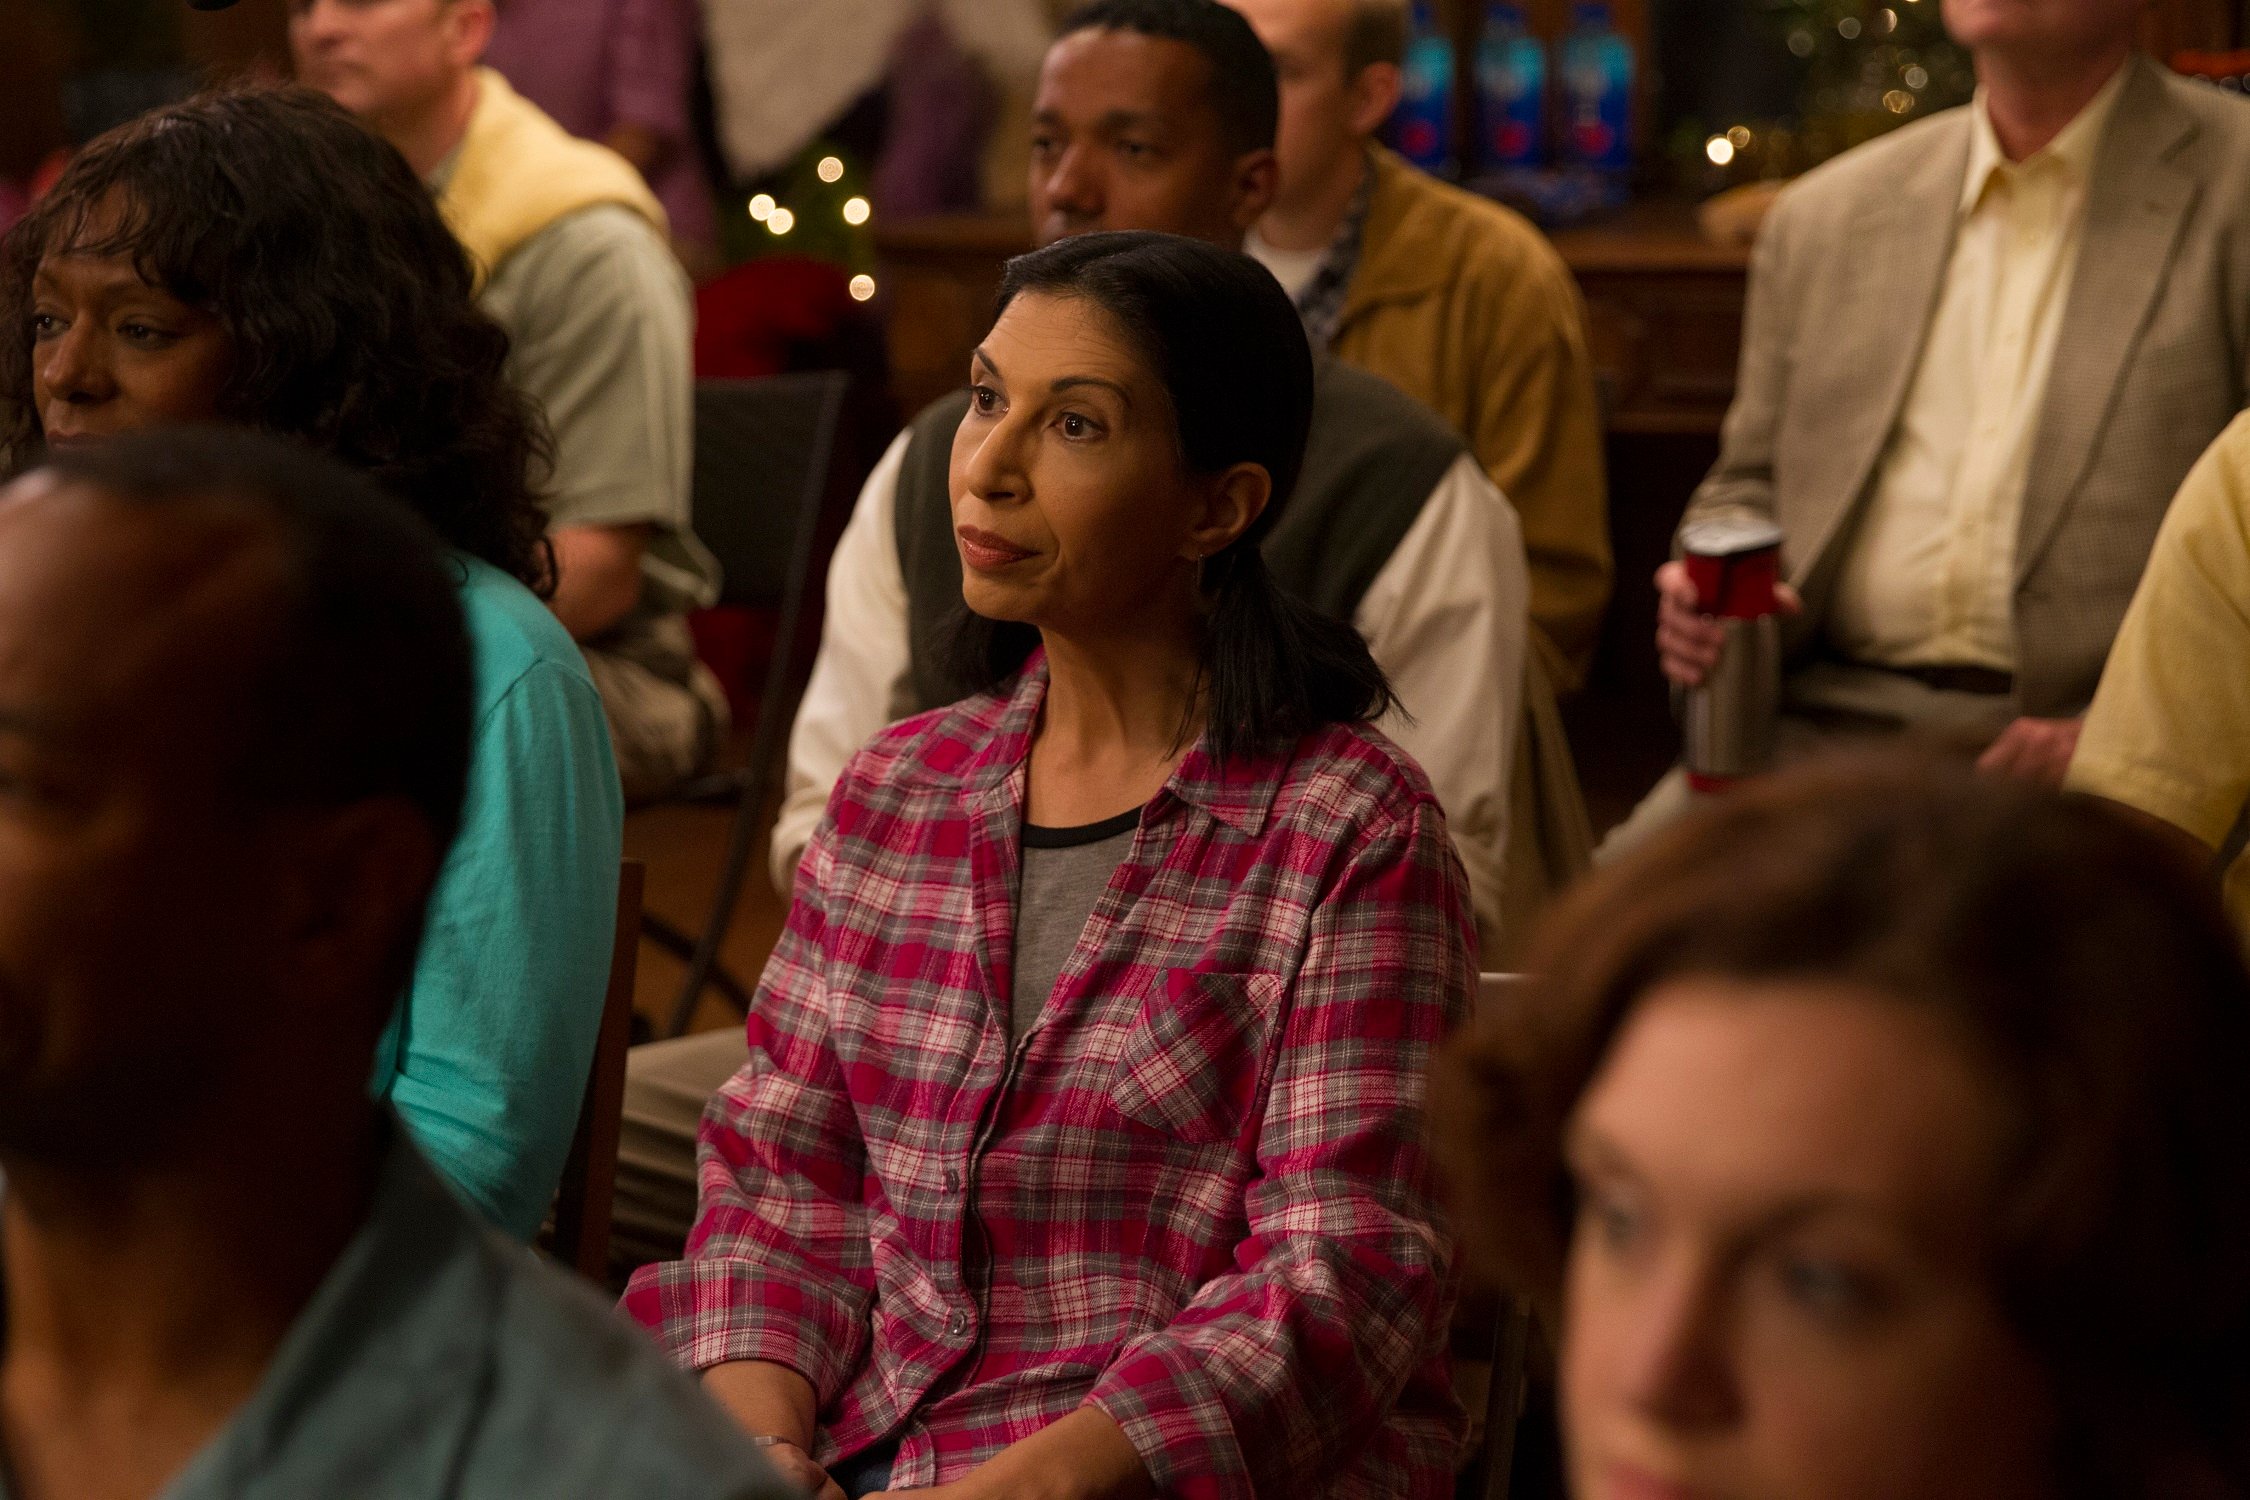 Rose Abdoo appears in 'Gilmore Girls: A Year in the Life' as Gypsy